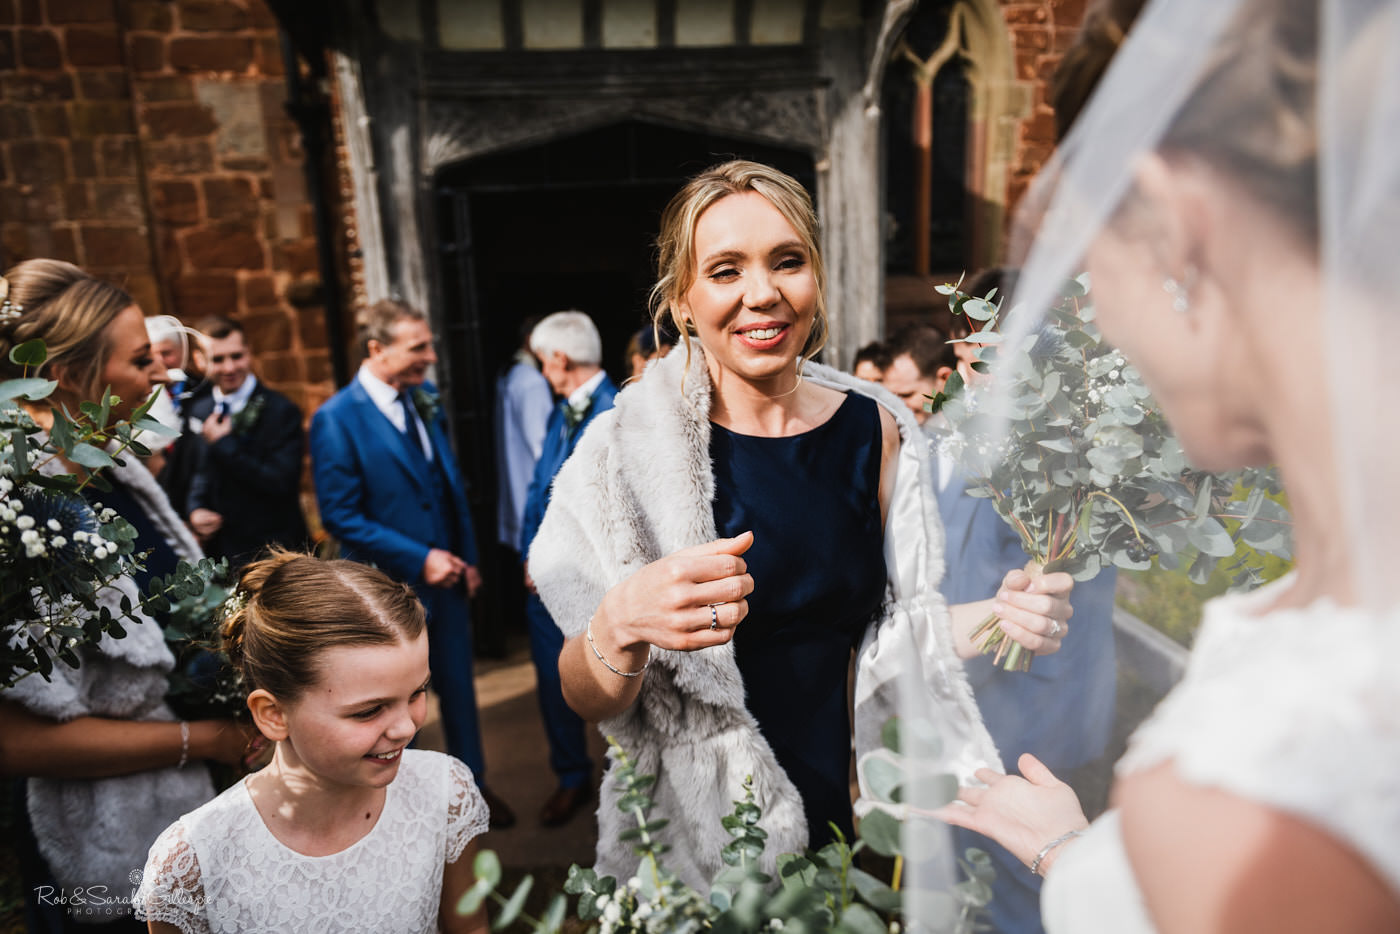 Wedding guests congratulate bride and groom at St Kenelm's church in Worcestershire